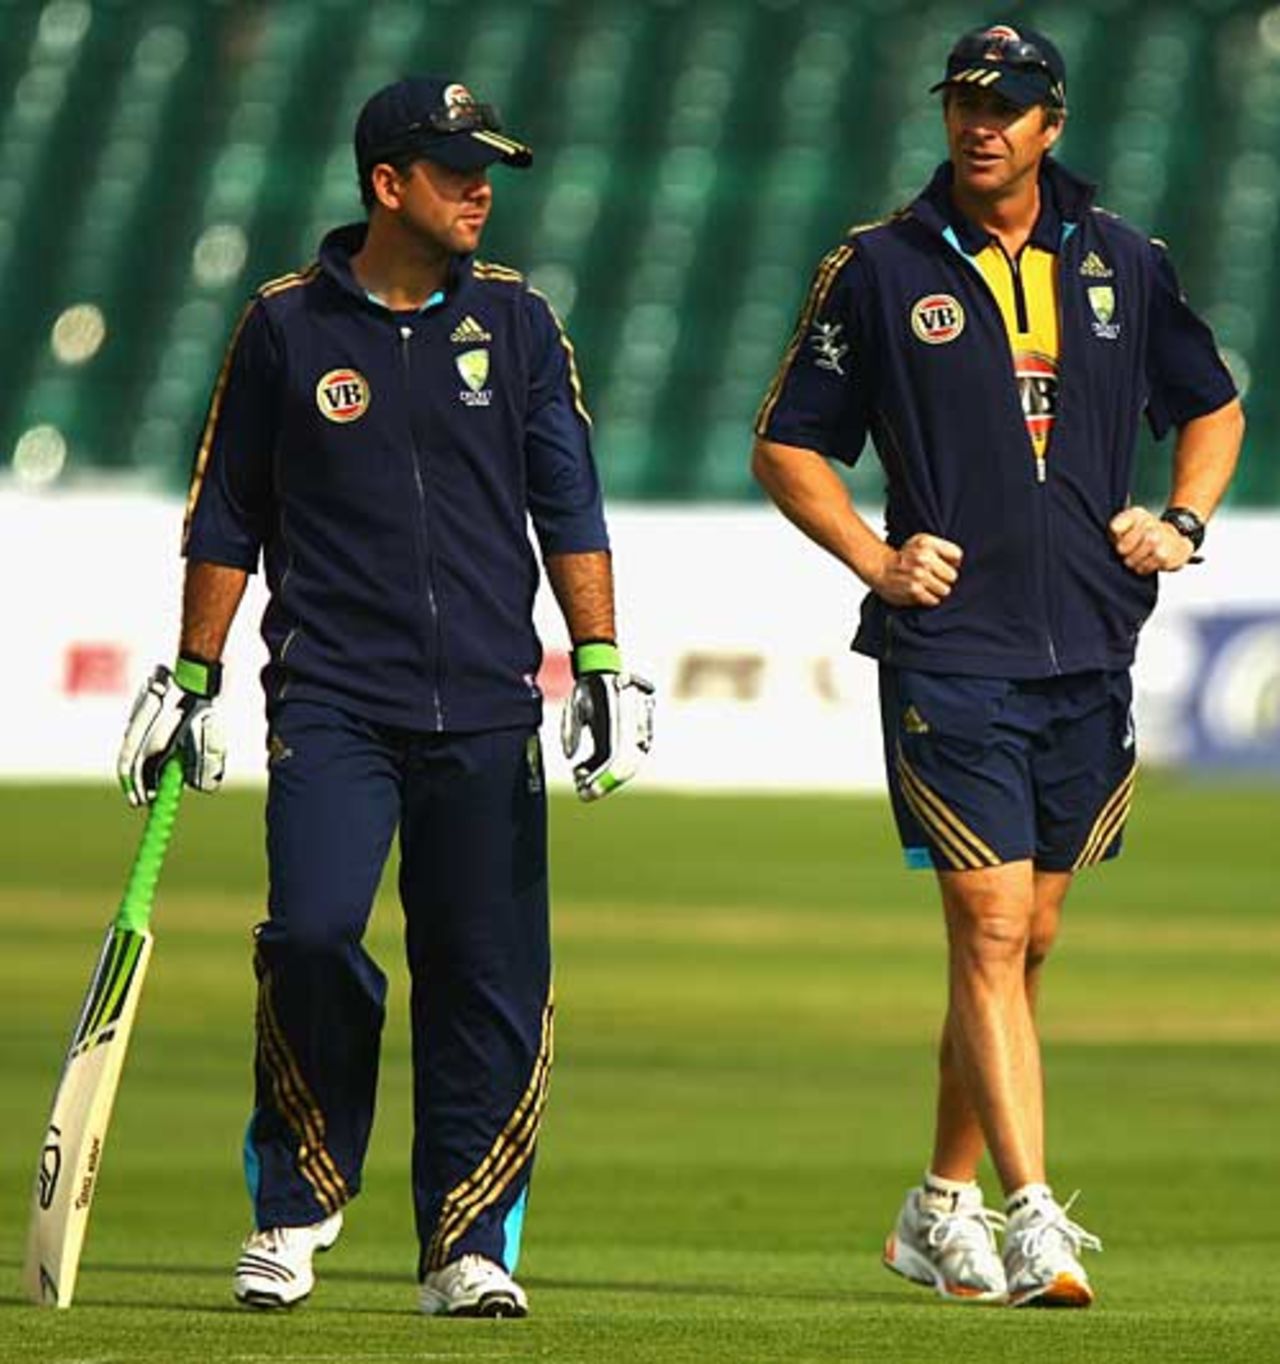 Troy Cooley (right) is coaching Australia in the absence of Tim Nielsen, Chester-le-Street, September 19, 2009